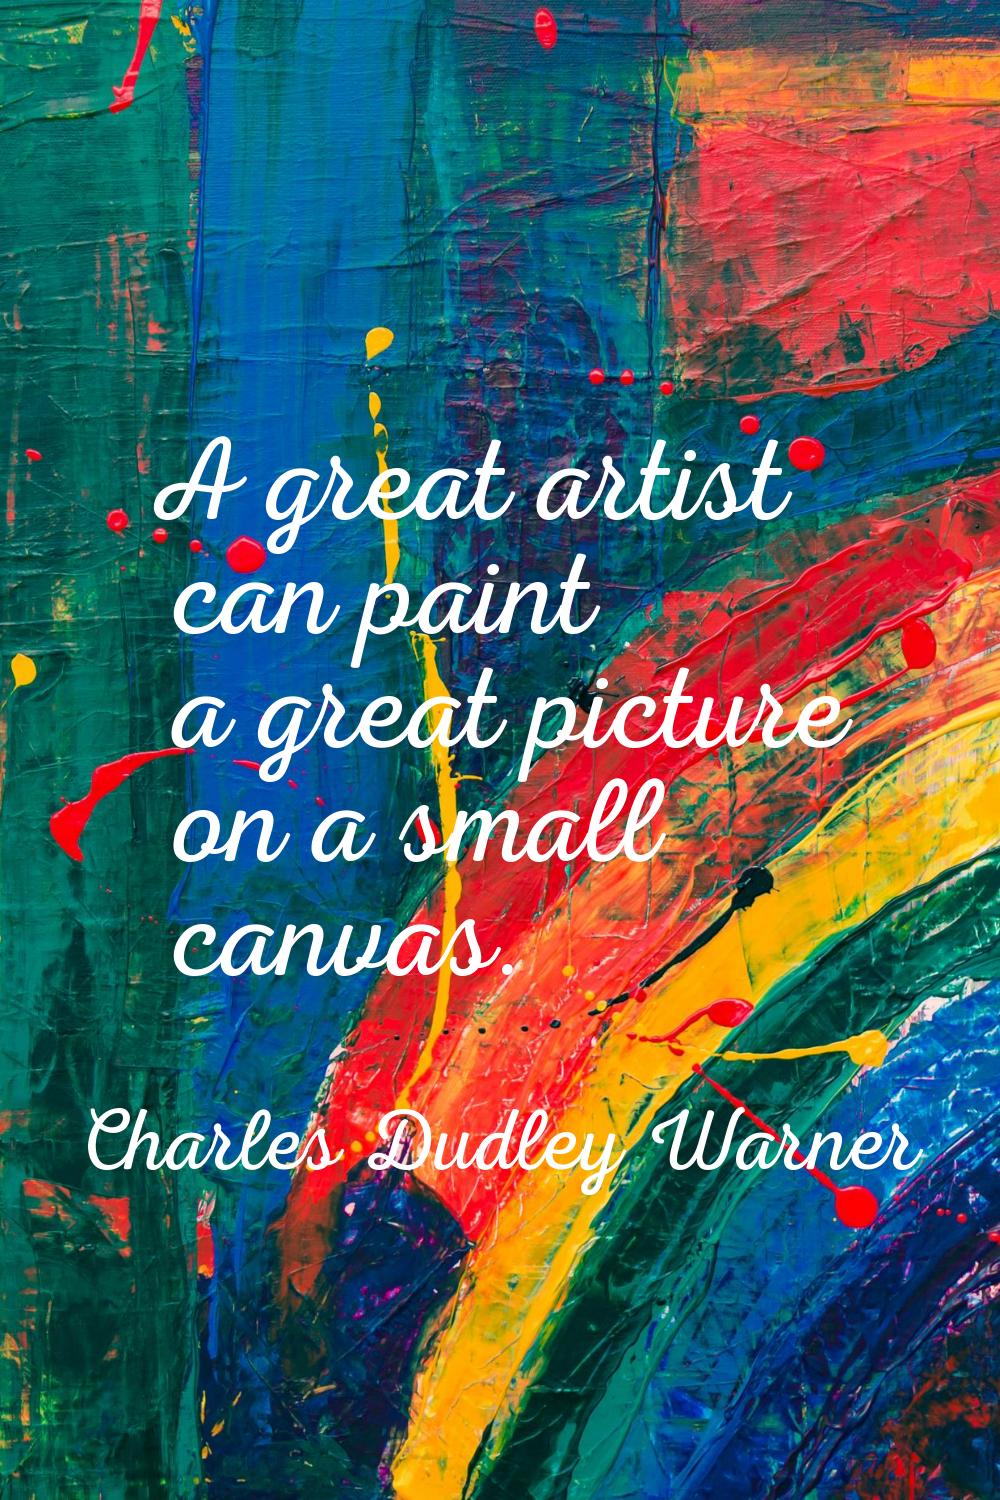 A great artist can paint a great picture on a small canvas.